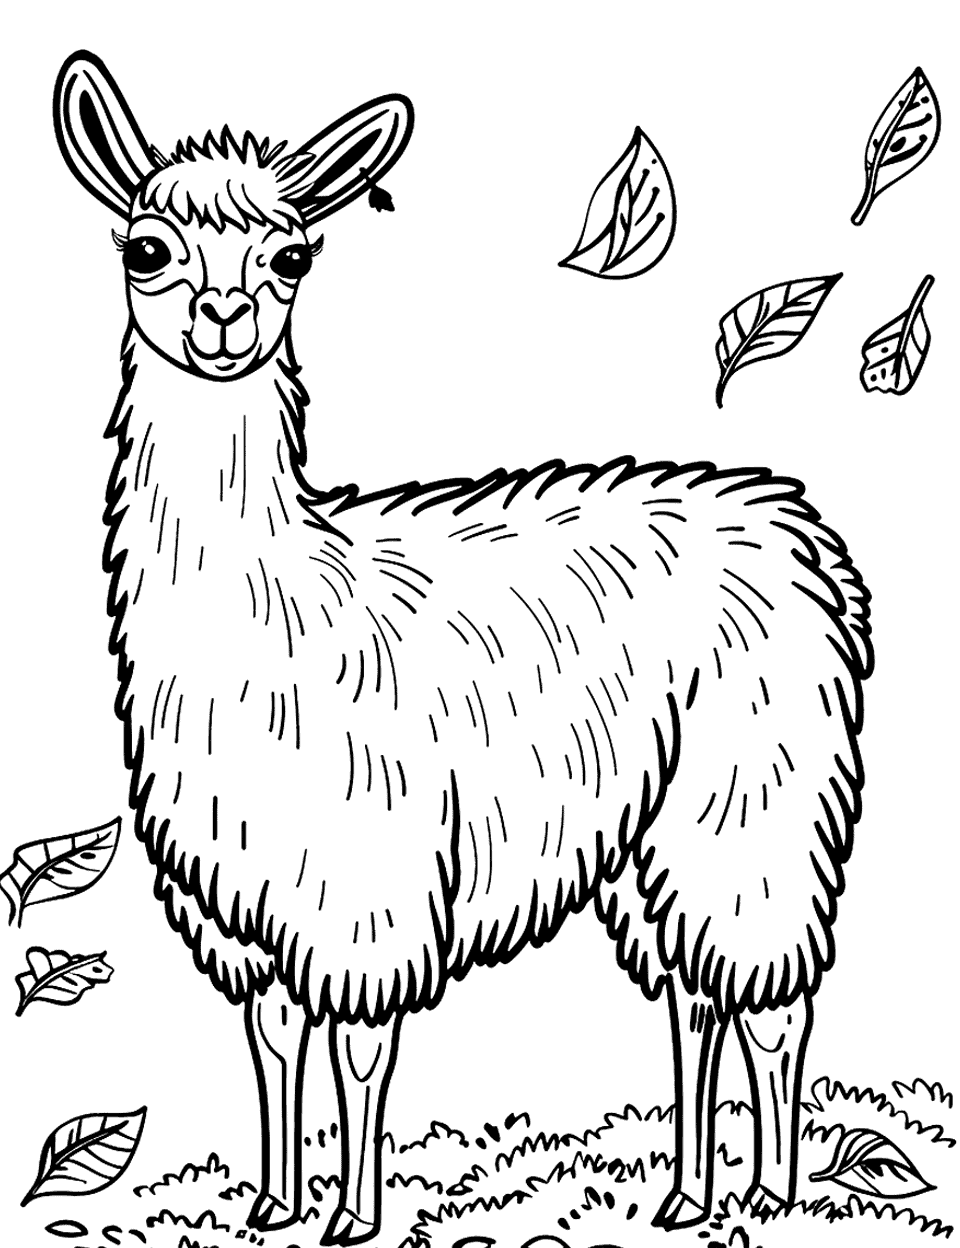 Llama and Falling Leaves Coloring Page - A llama amidst autumn leaves falling gently.